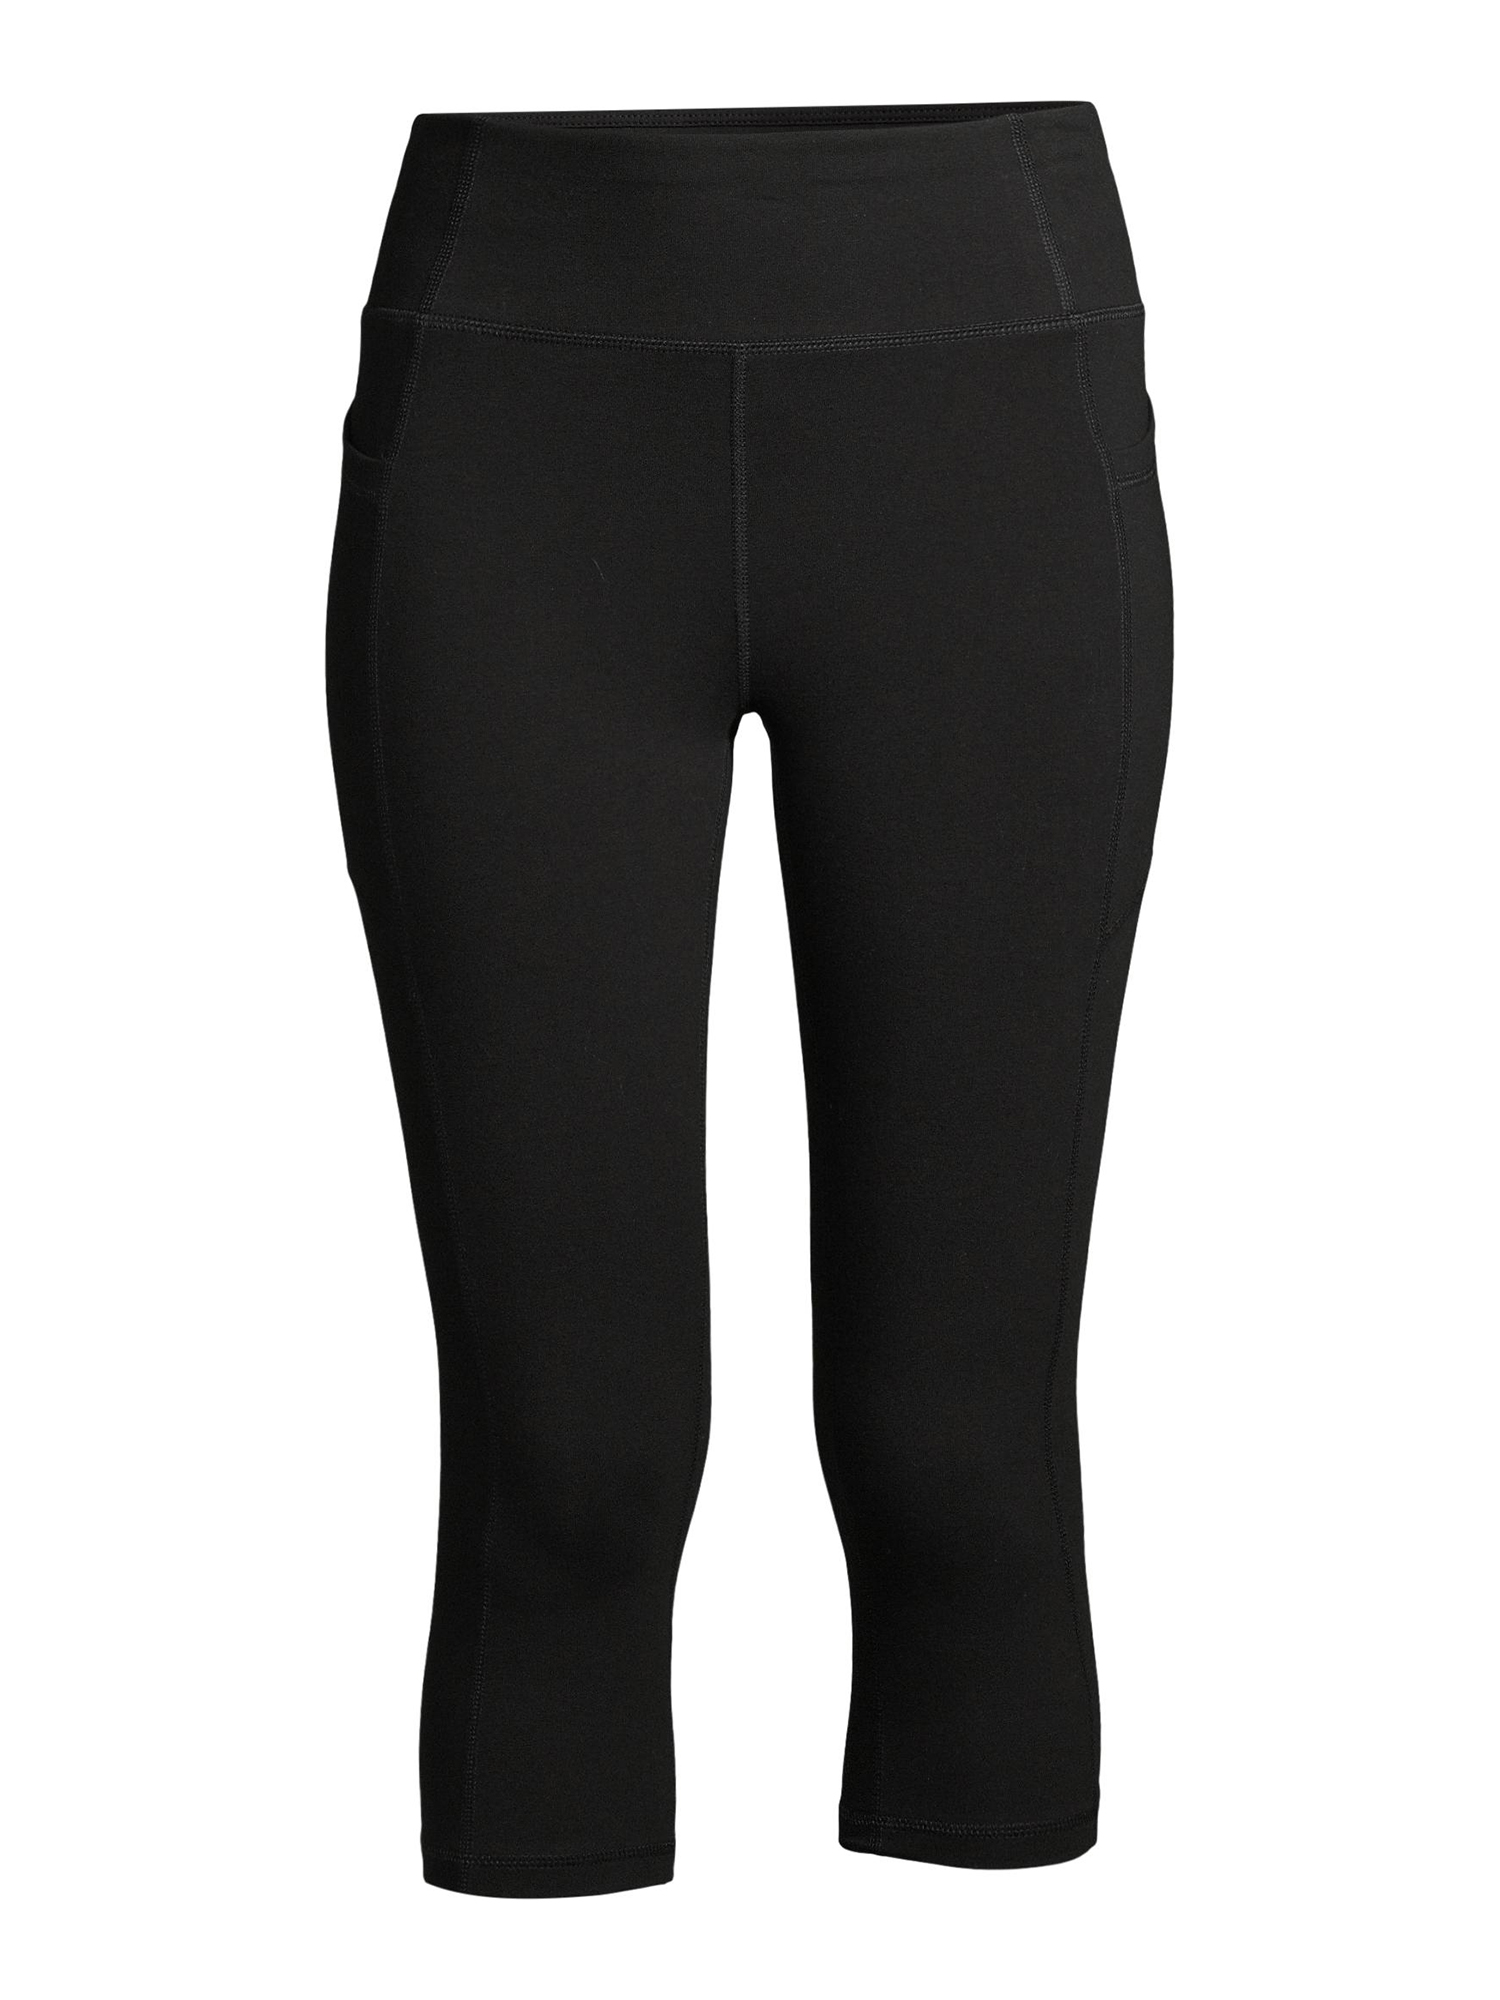 Athletic Works Women's Capris with Side Pockets - Walmart.com